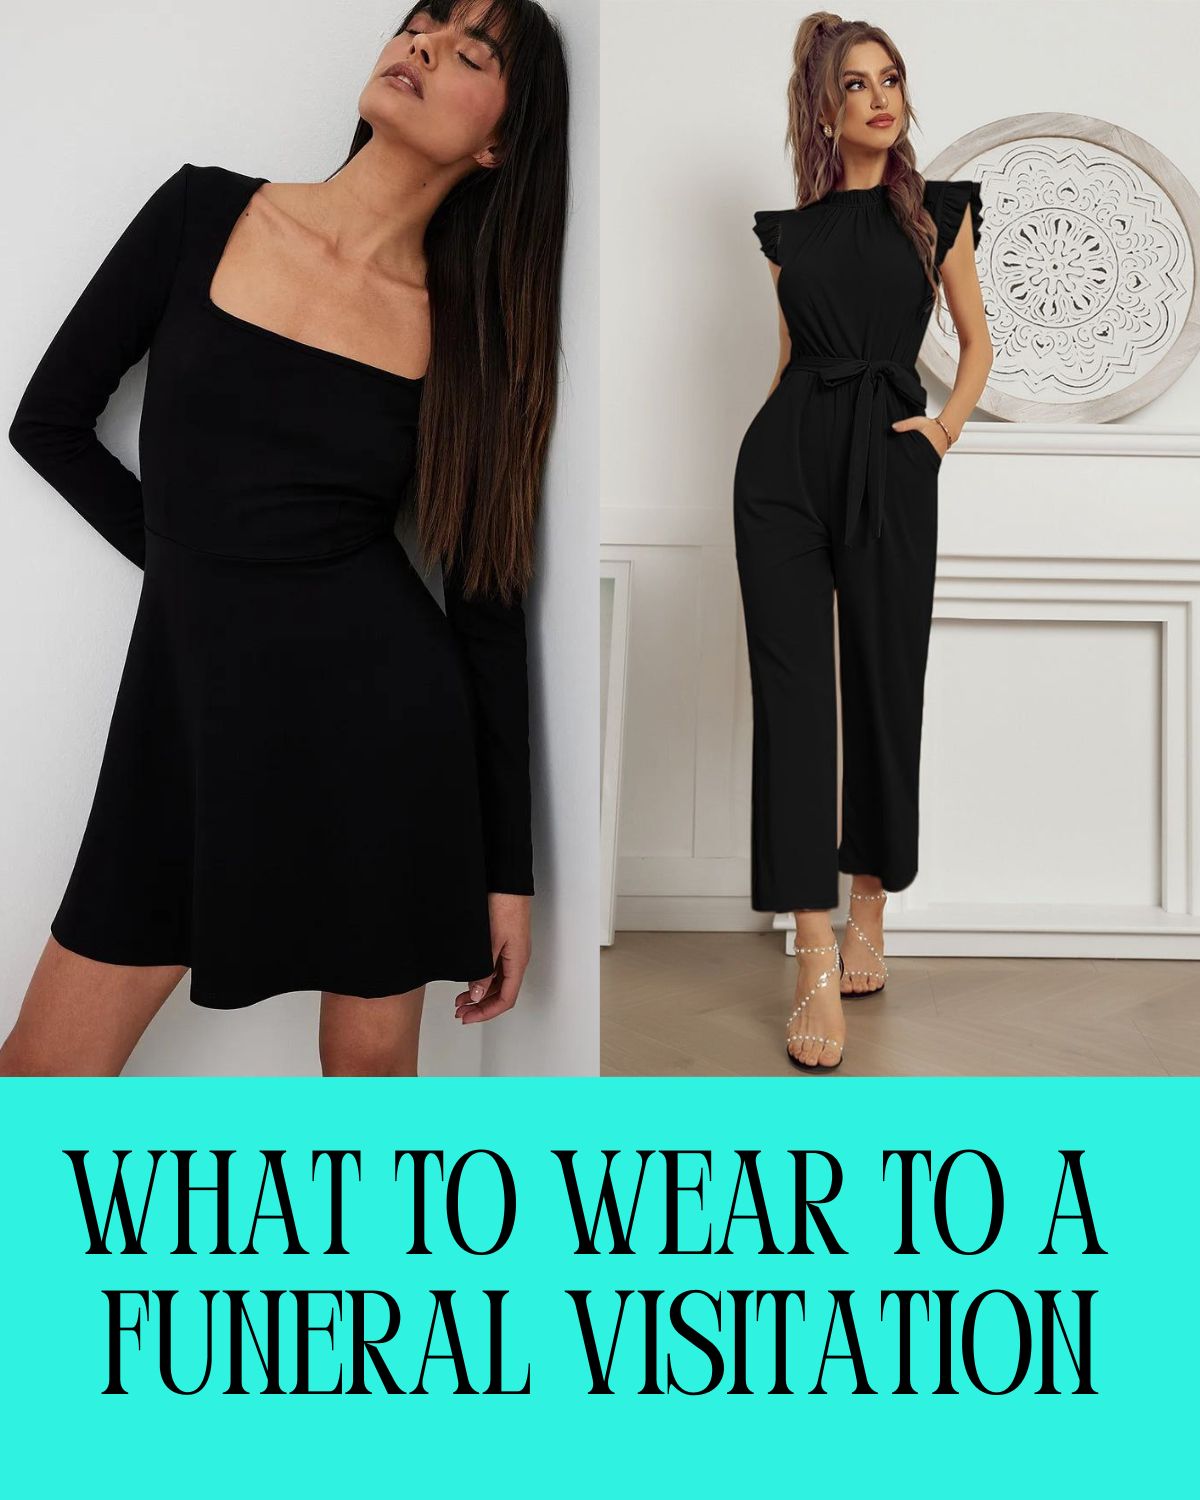 Two funeral outfit ideas